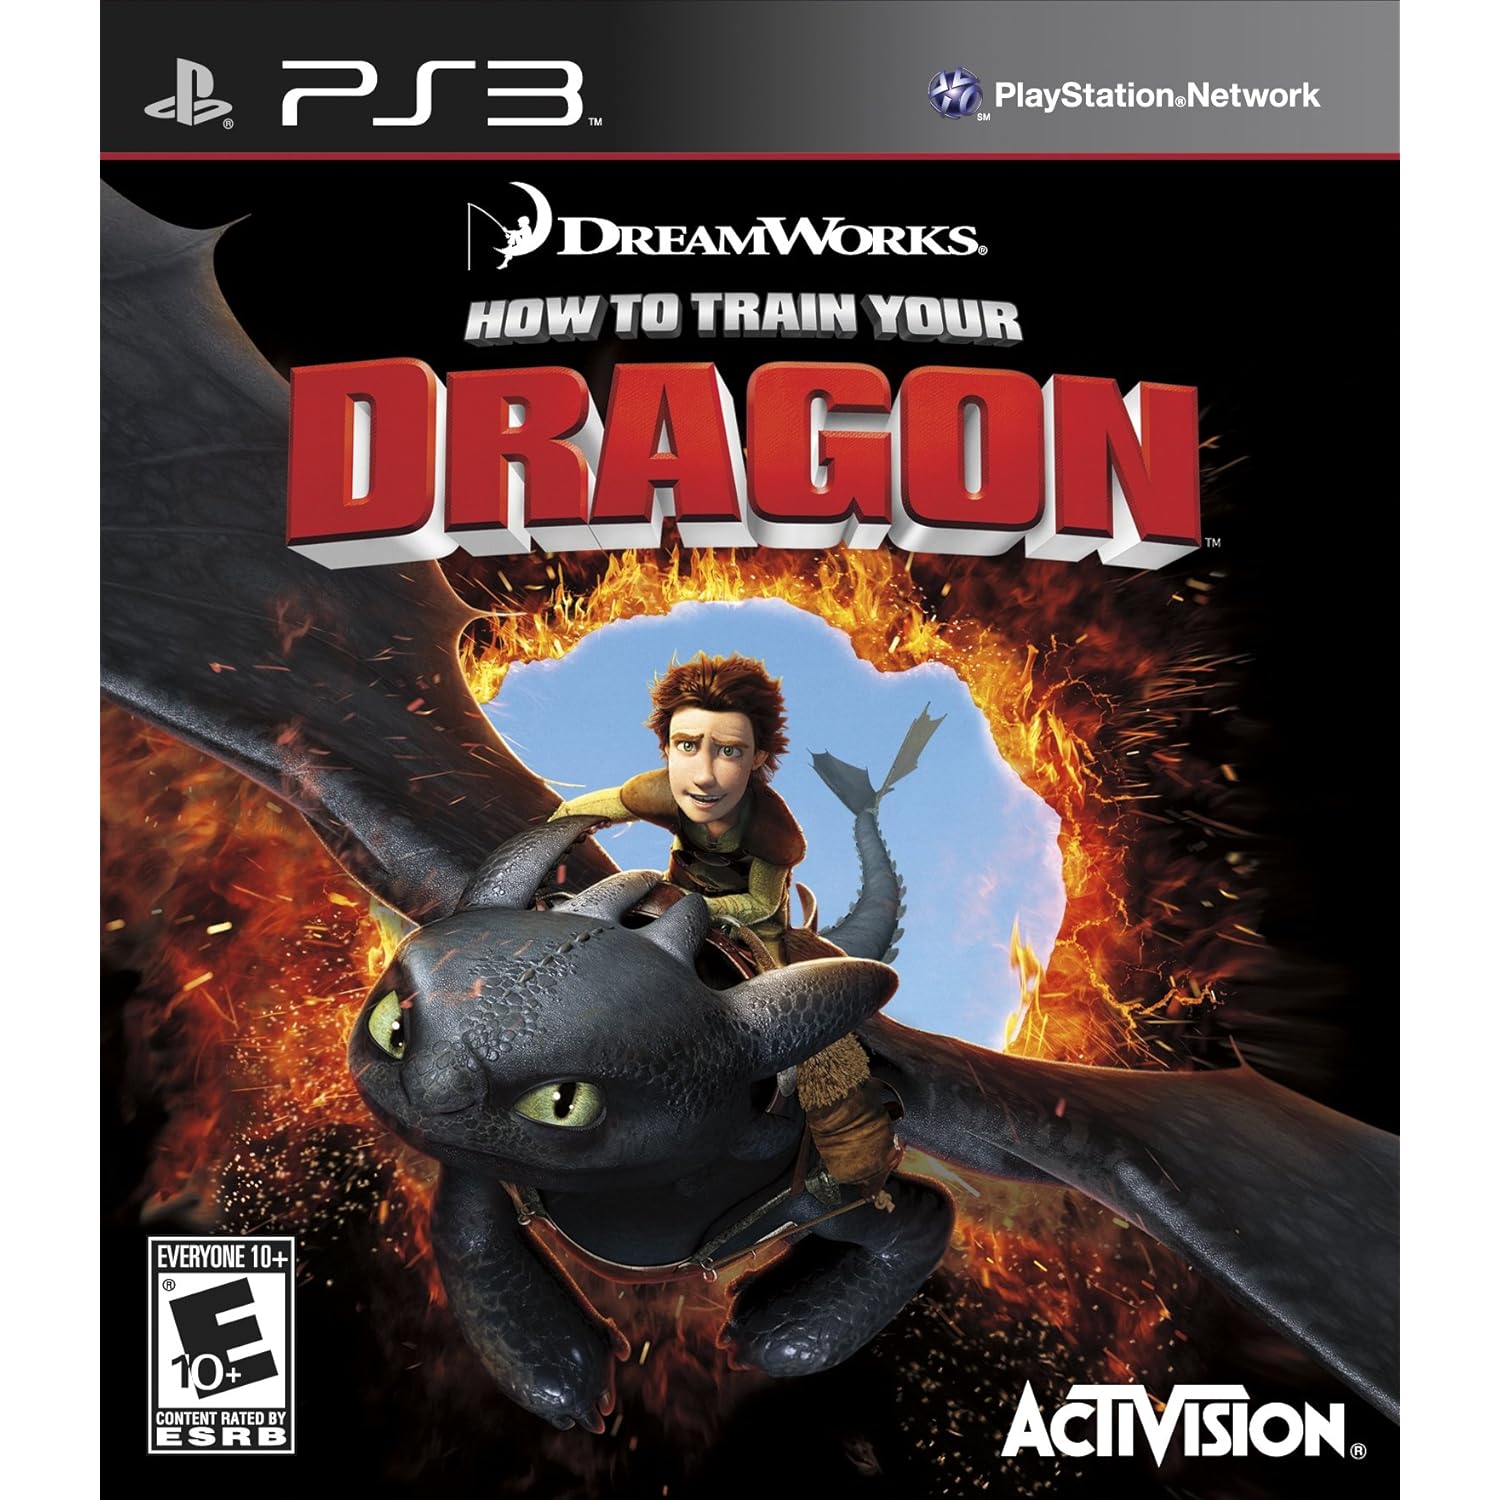 Activision How to Train Your Dragon - Playstation 3